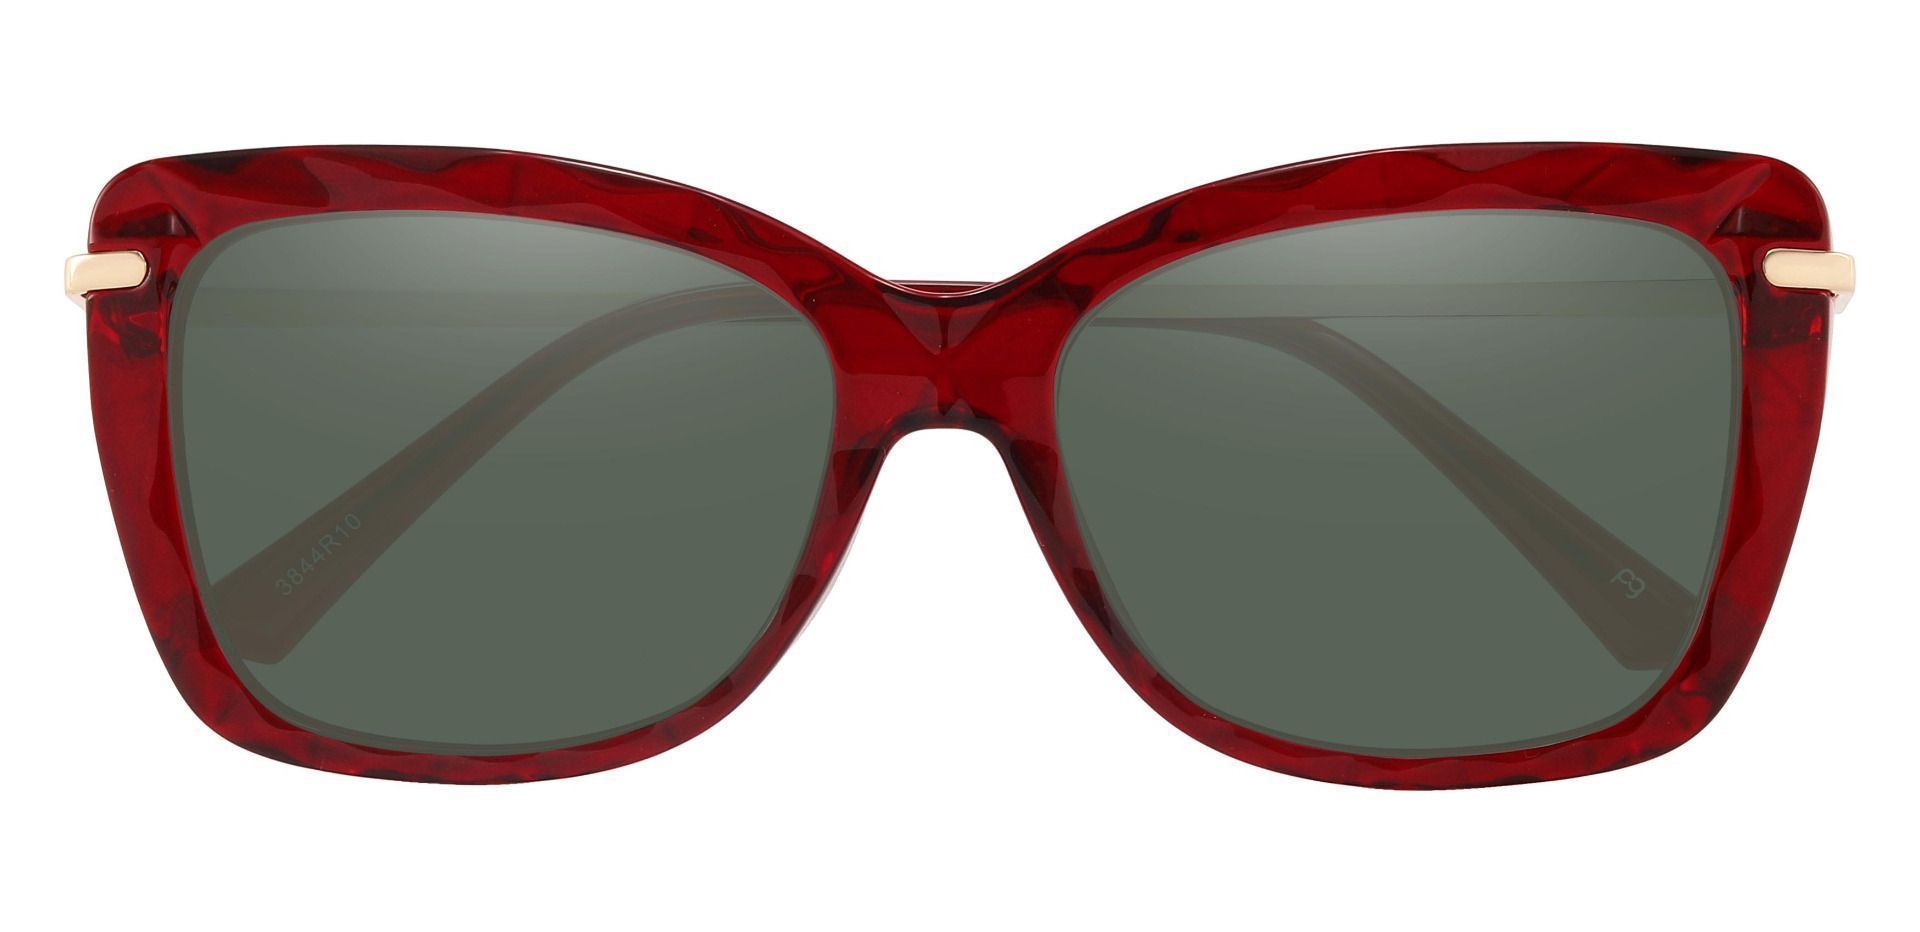 Shoshanna Rectangle Reading Sunglasses - Red Frame With Green Lenses